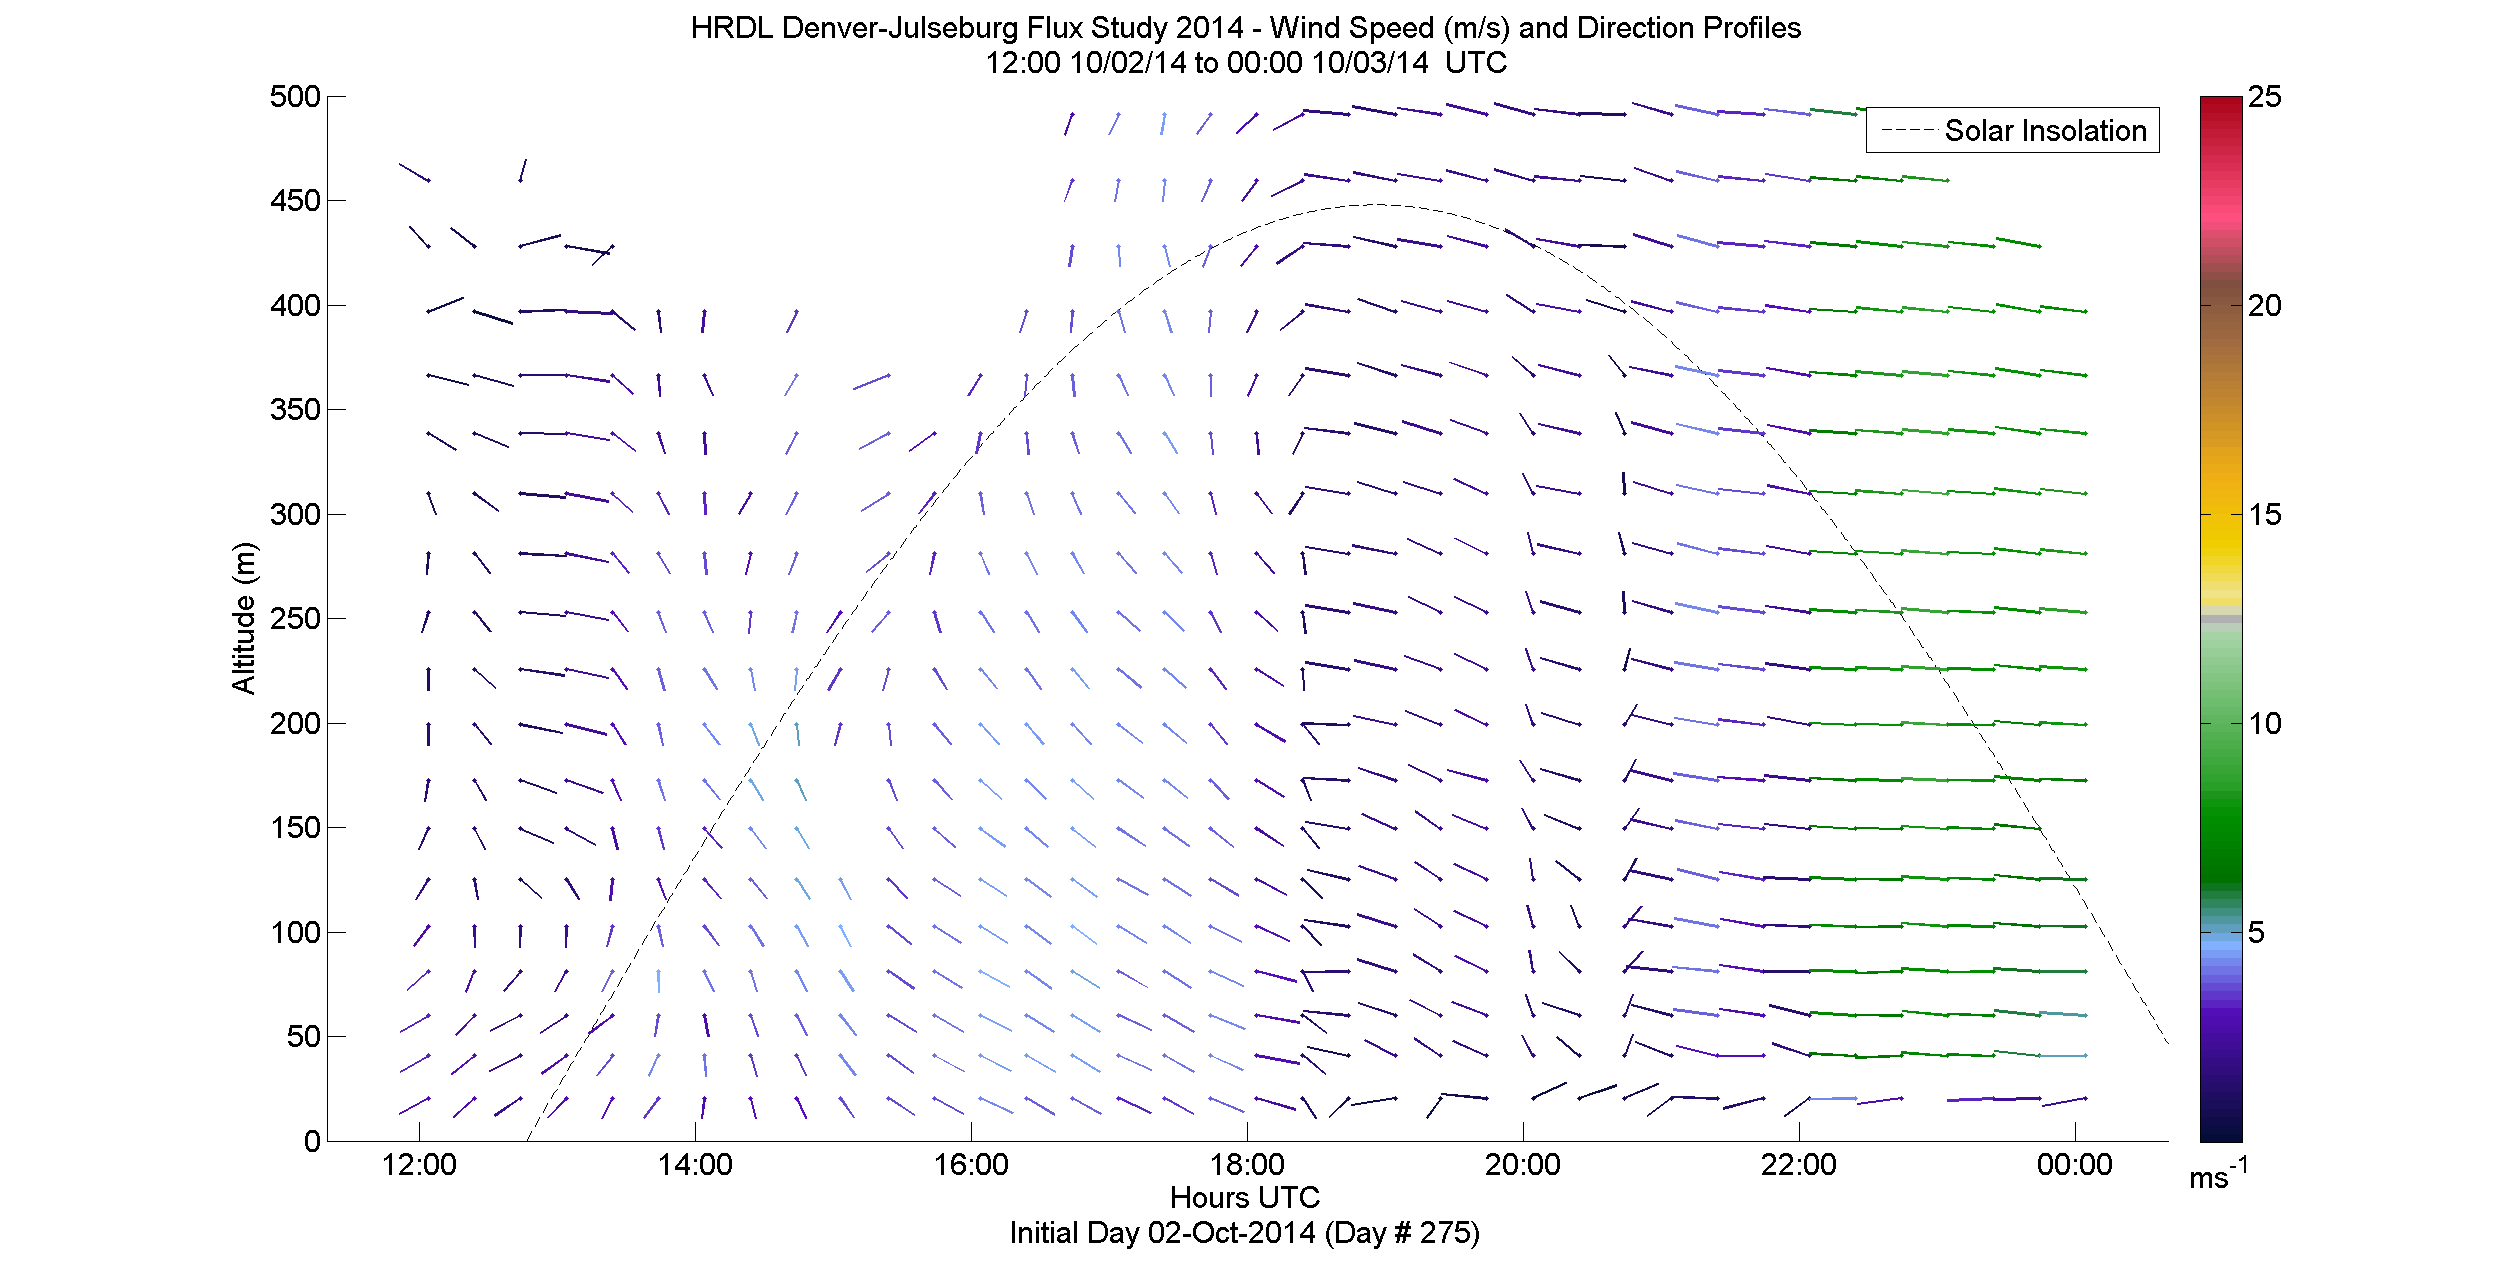 HRDL speed and direction profile - October 2 pm